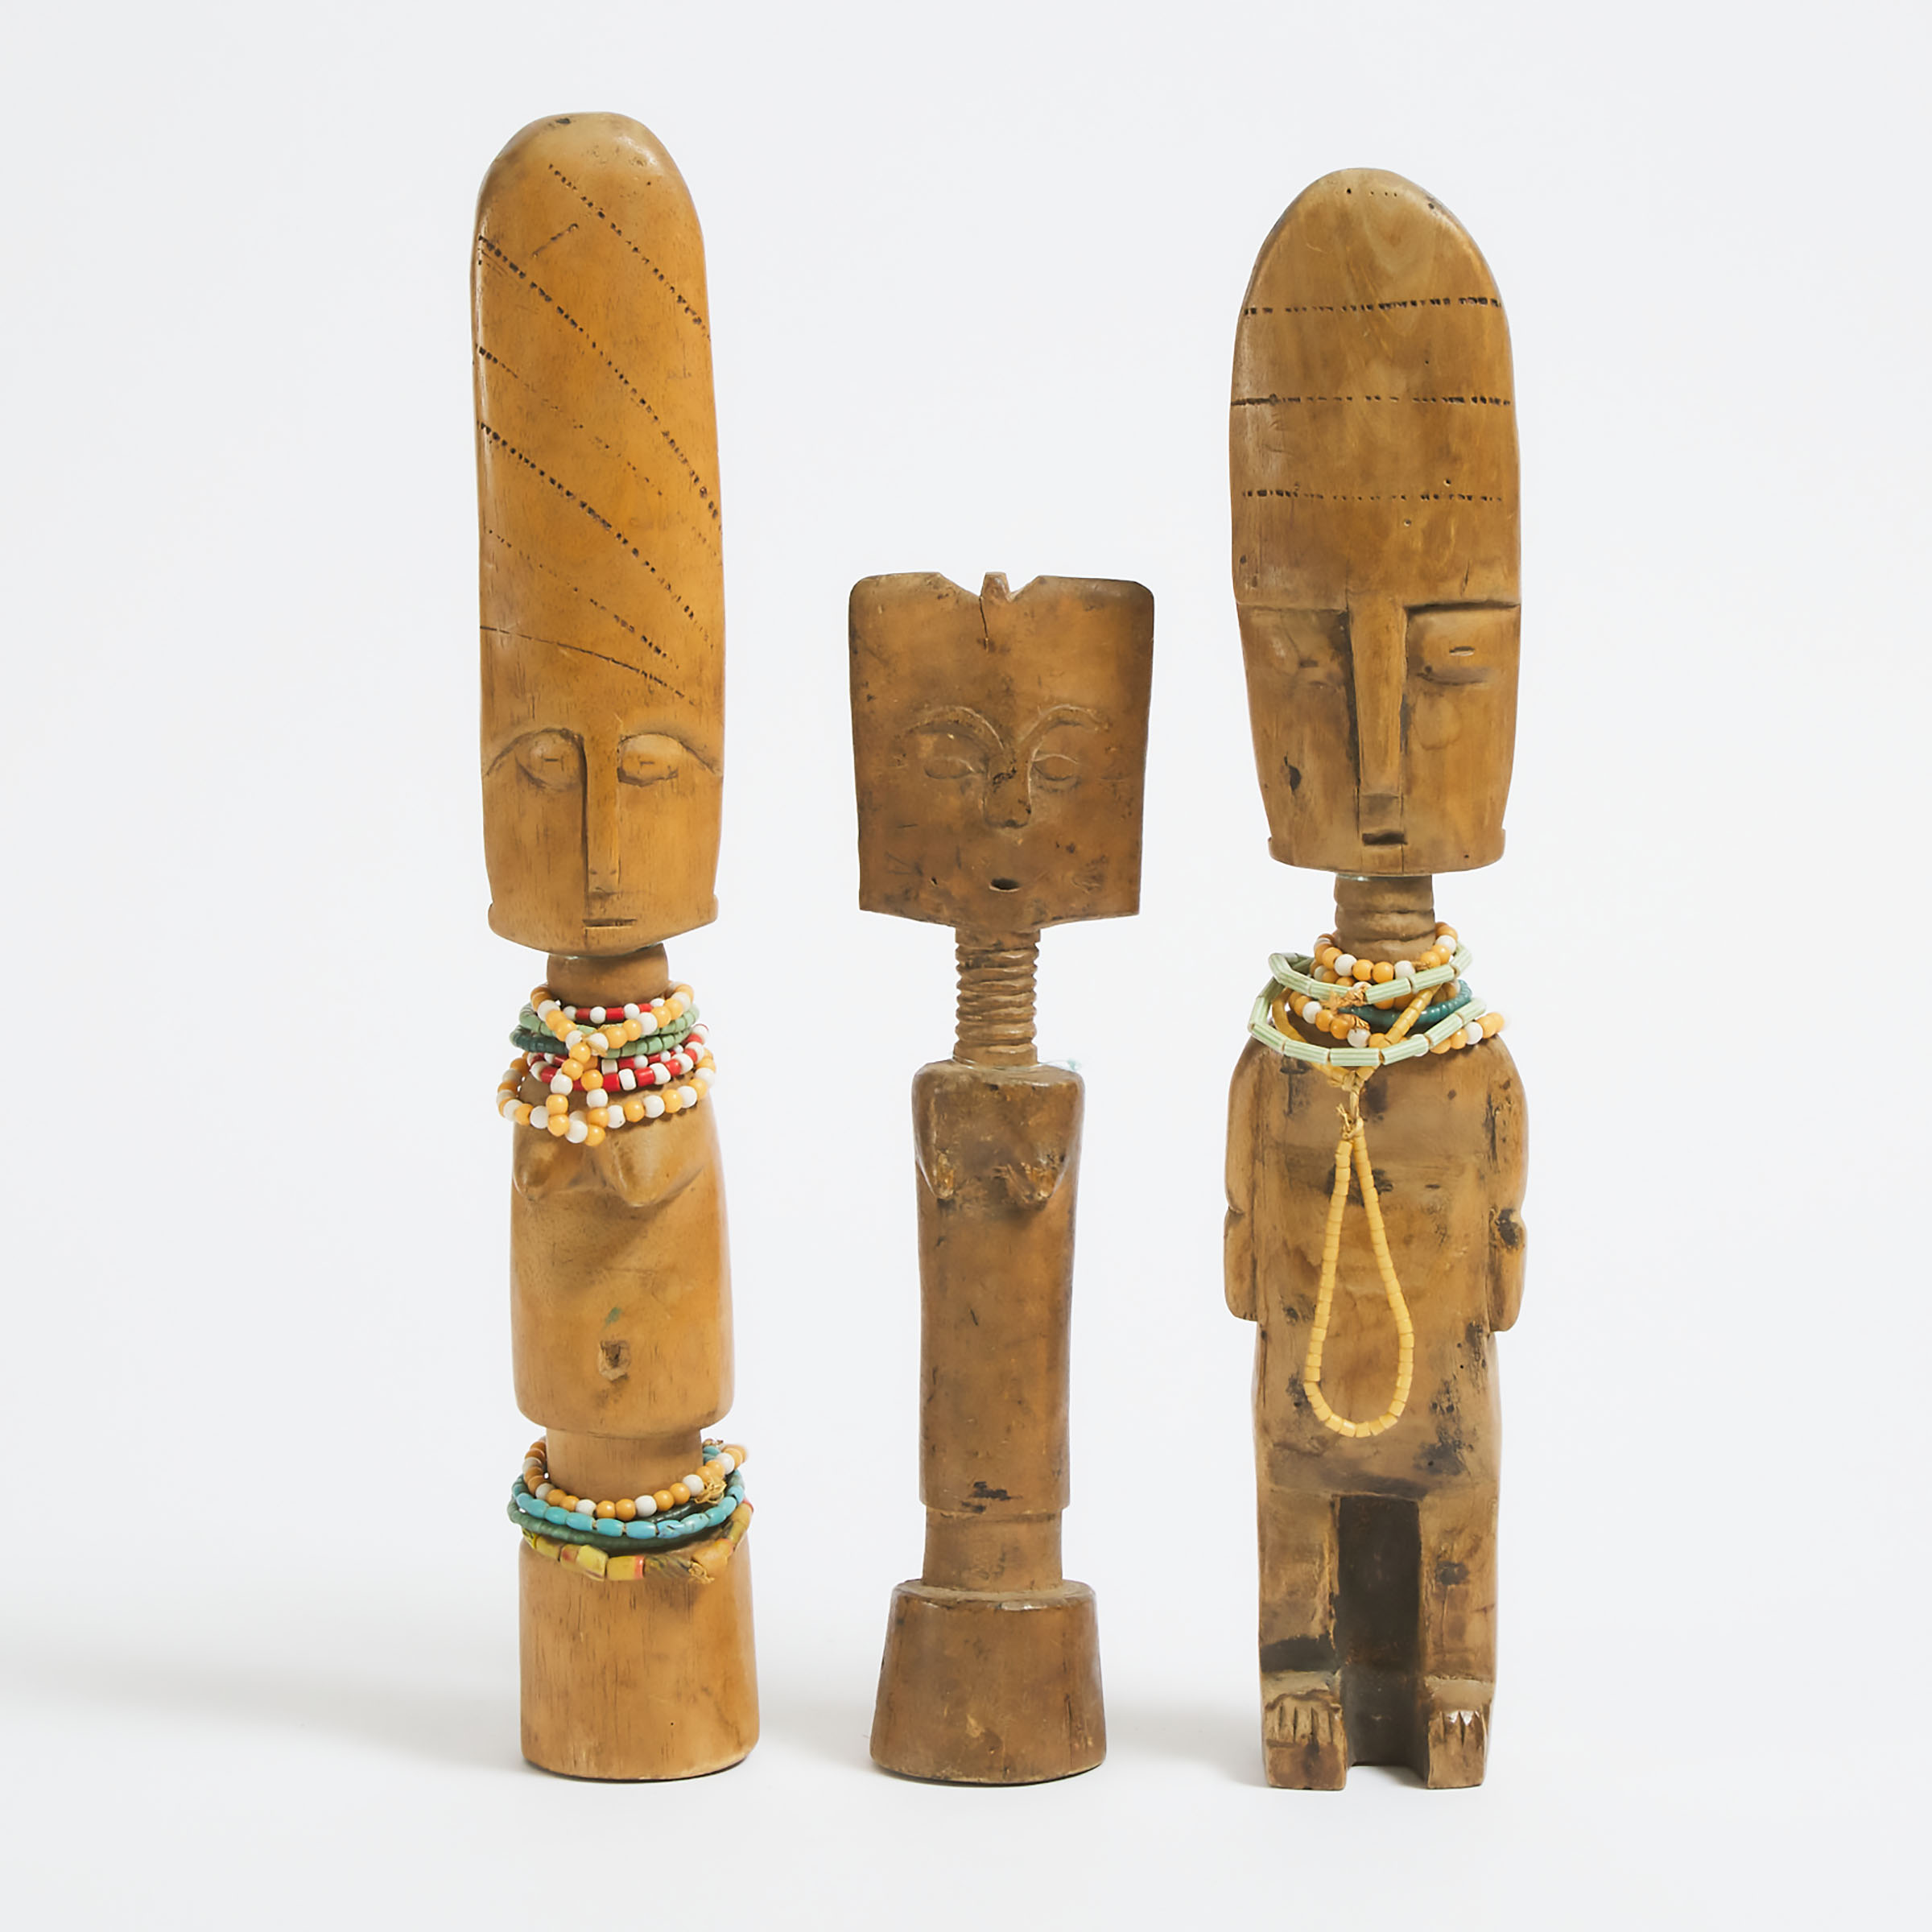 Three Fante Dolls, Ghana, West Africa, mid to late 20th century